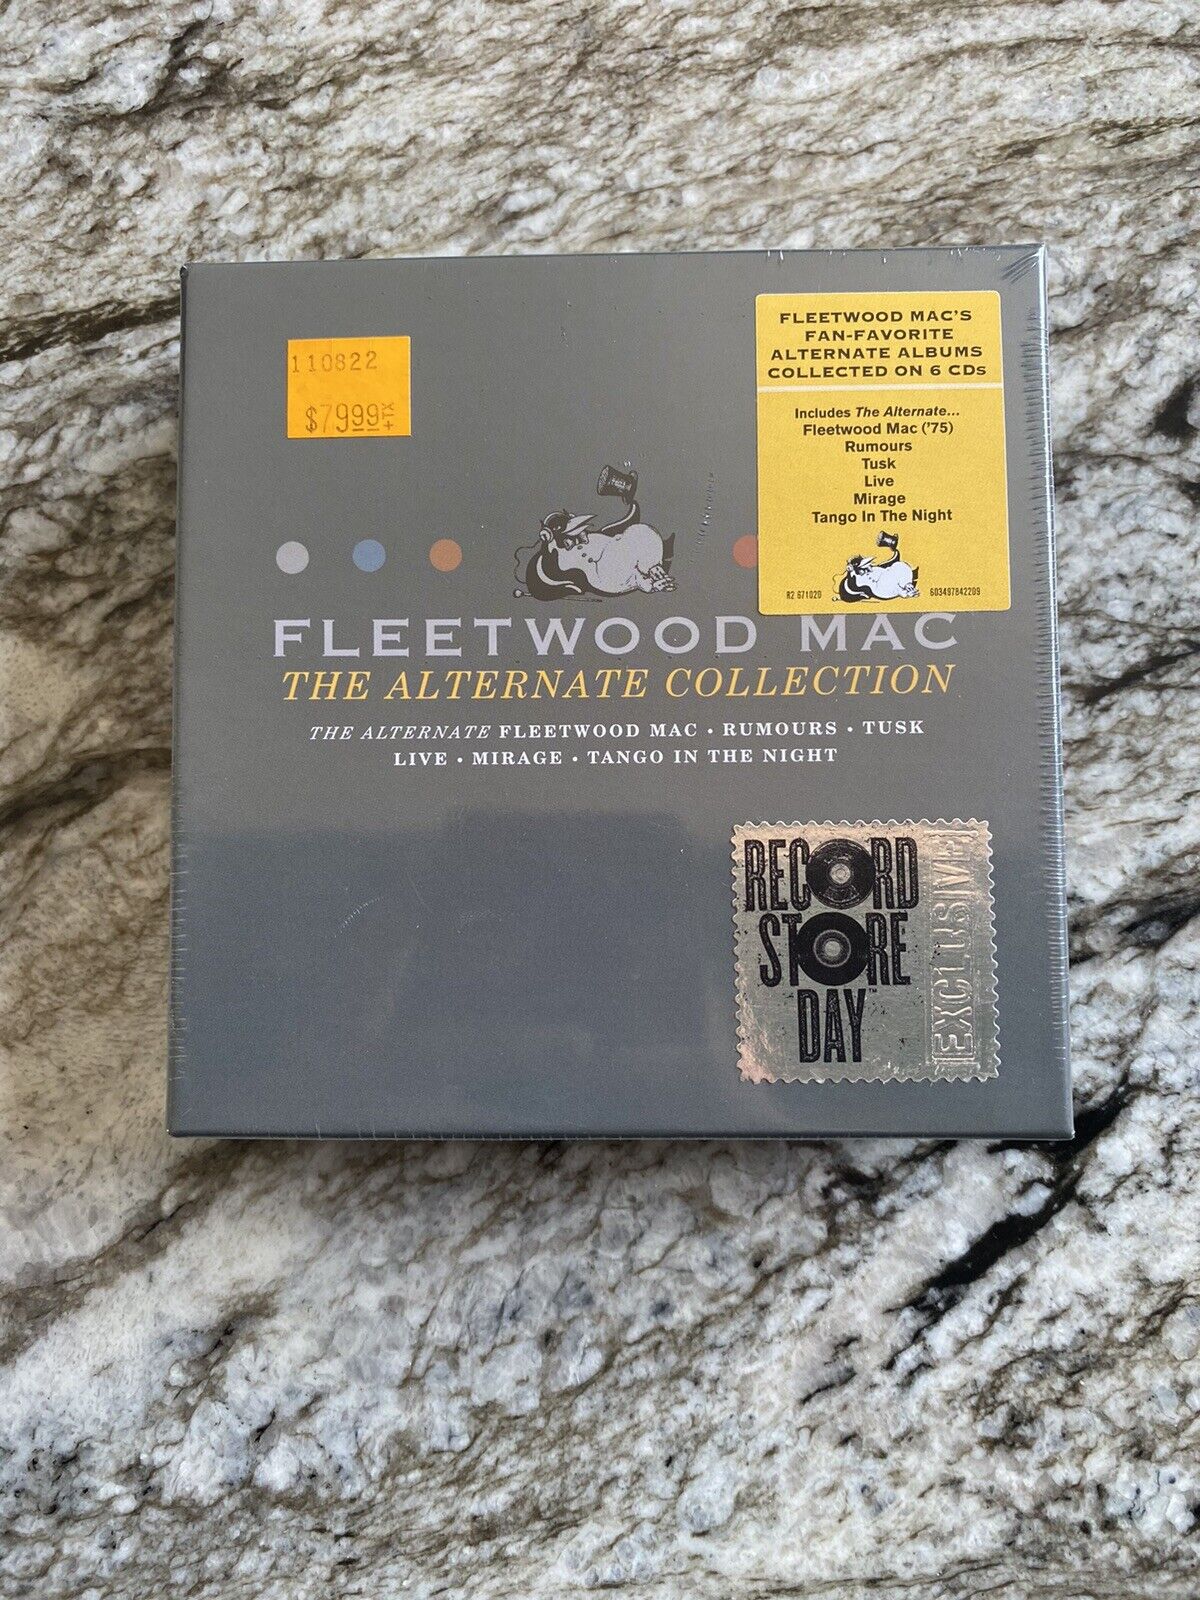 FLEETWOOD MAC - ALTERNATE COLLECTION 6CD BOX SET COMPACT DISC NEW SEALED RSD BF